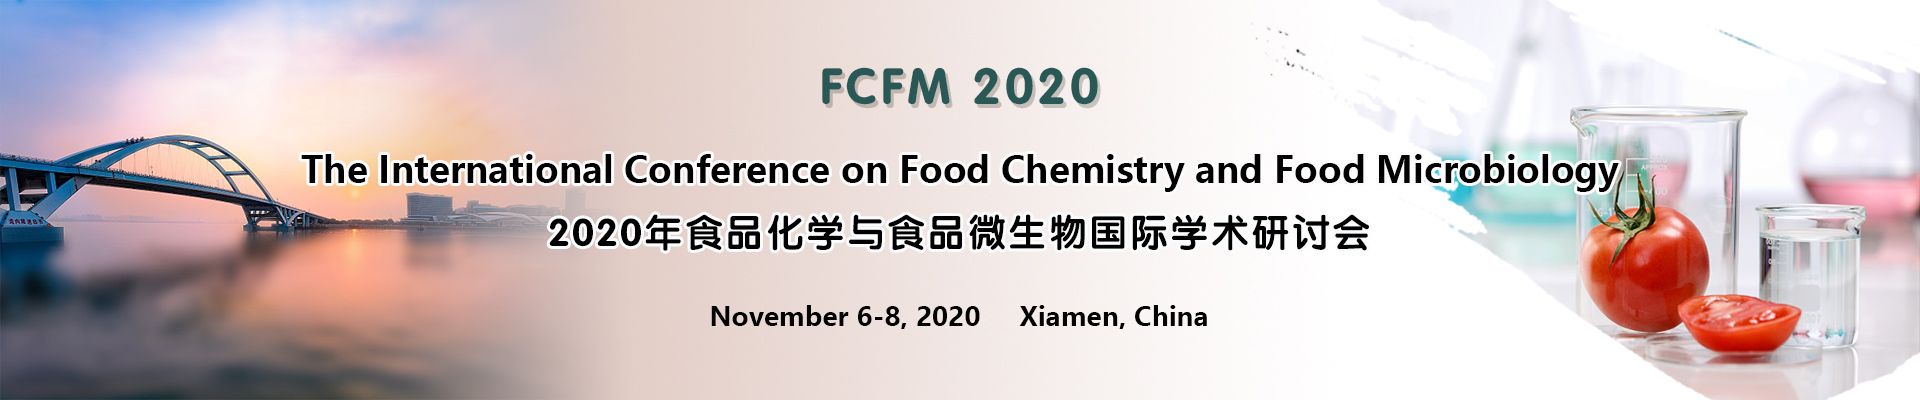 International Conference on Food Chemistry and Food Microbiology (FCFM 2020), Xiamen, Fujian, China